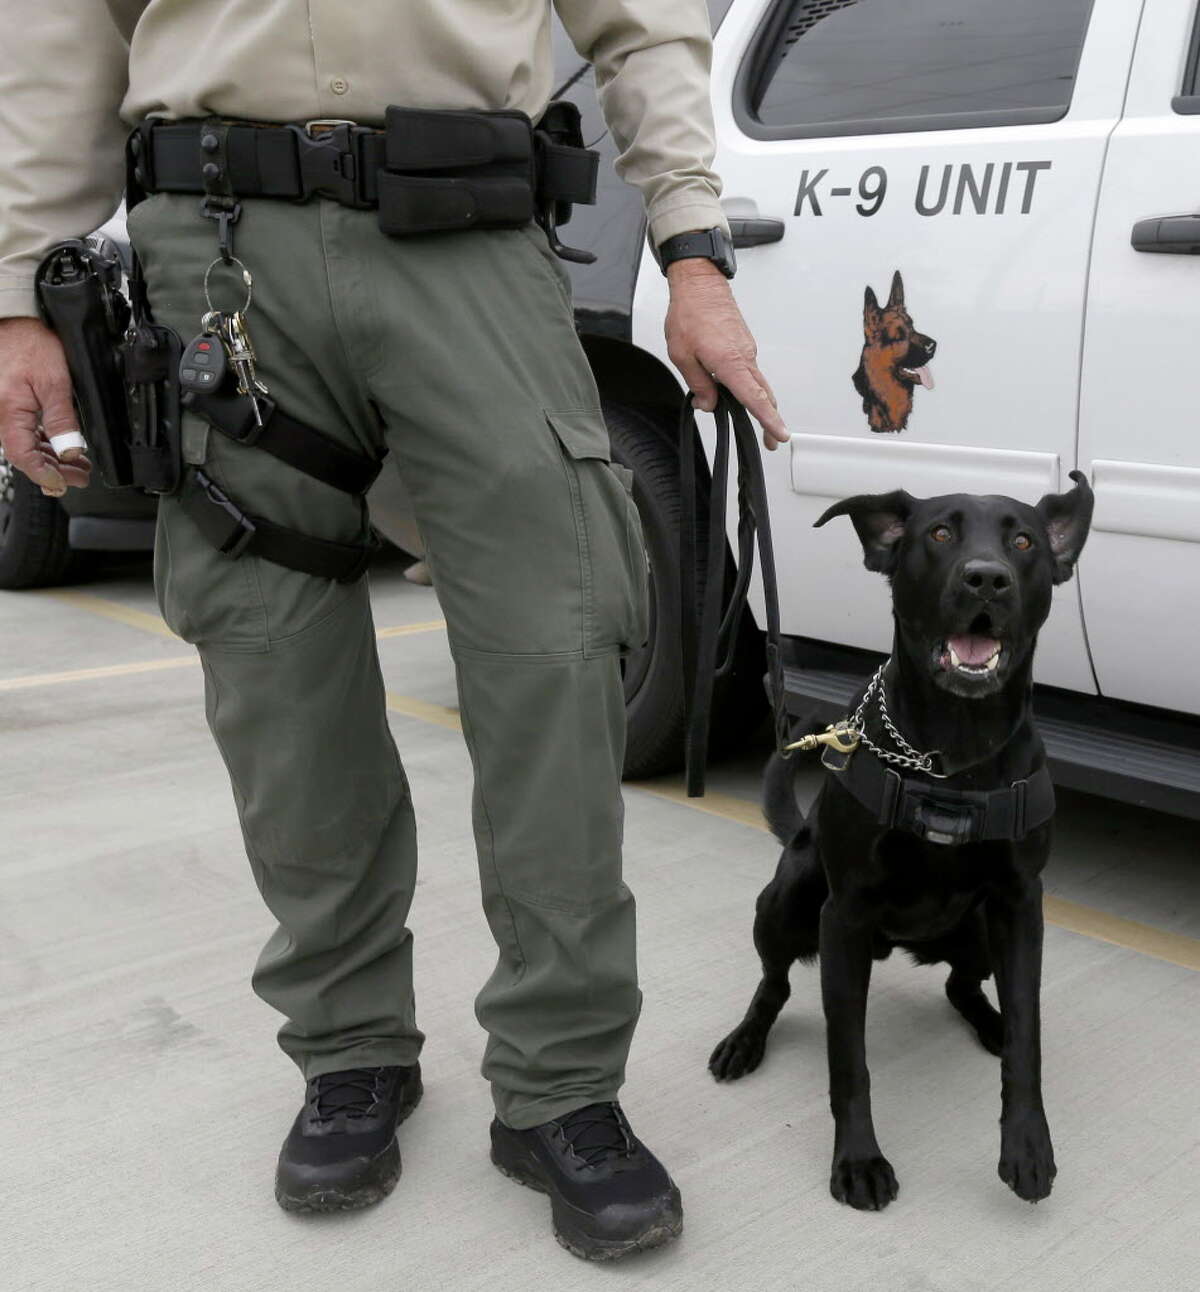 Los Angeles County Sheriff's Deputy Richard Faulk with his K-9 partner, Clyde, are shown after a swearing-in ceremony of police officers as Special Deputy U.S. Marshals for Super Bowl LI held at the Houston Police Officers Union, 1600 State St., Wednesday, Jan. 25, 2017, in Houston. Police officers traveled from across the country and some as far as Guam to be temporary U.S. Marshals for the upcoming Super Bowl LI.